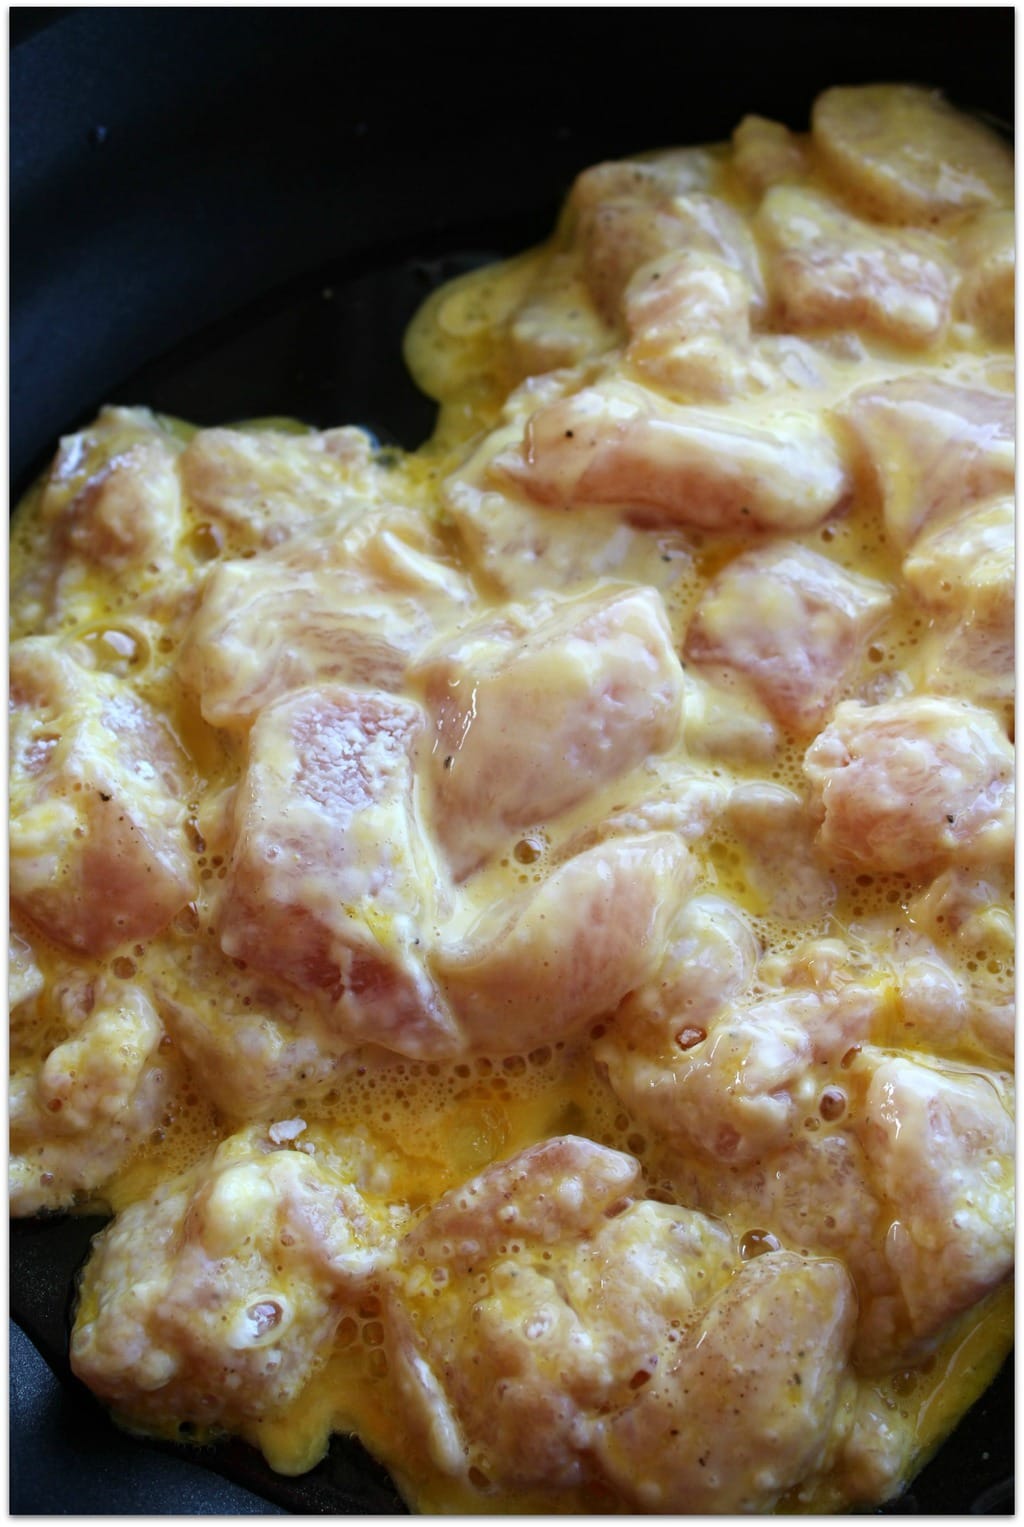 This Baked Sweet Hawaiian Chicken recipe is so easy and your family will love it. Chicken recipes are my go-to dinner recipe because they are usually quick and not too difficult to pull off. We like easy around here! The sweetness of the pineapple mixed with the red pepper is so delicious. You will want to make this again and again!